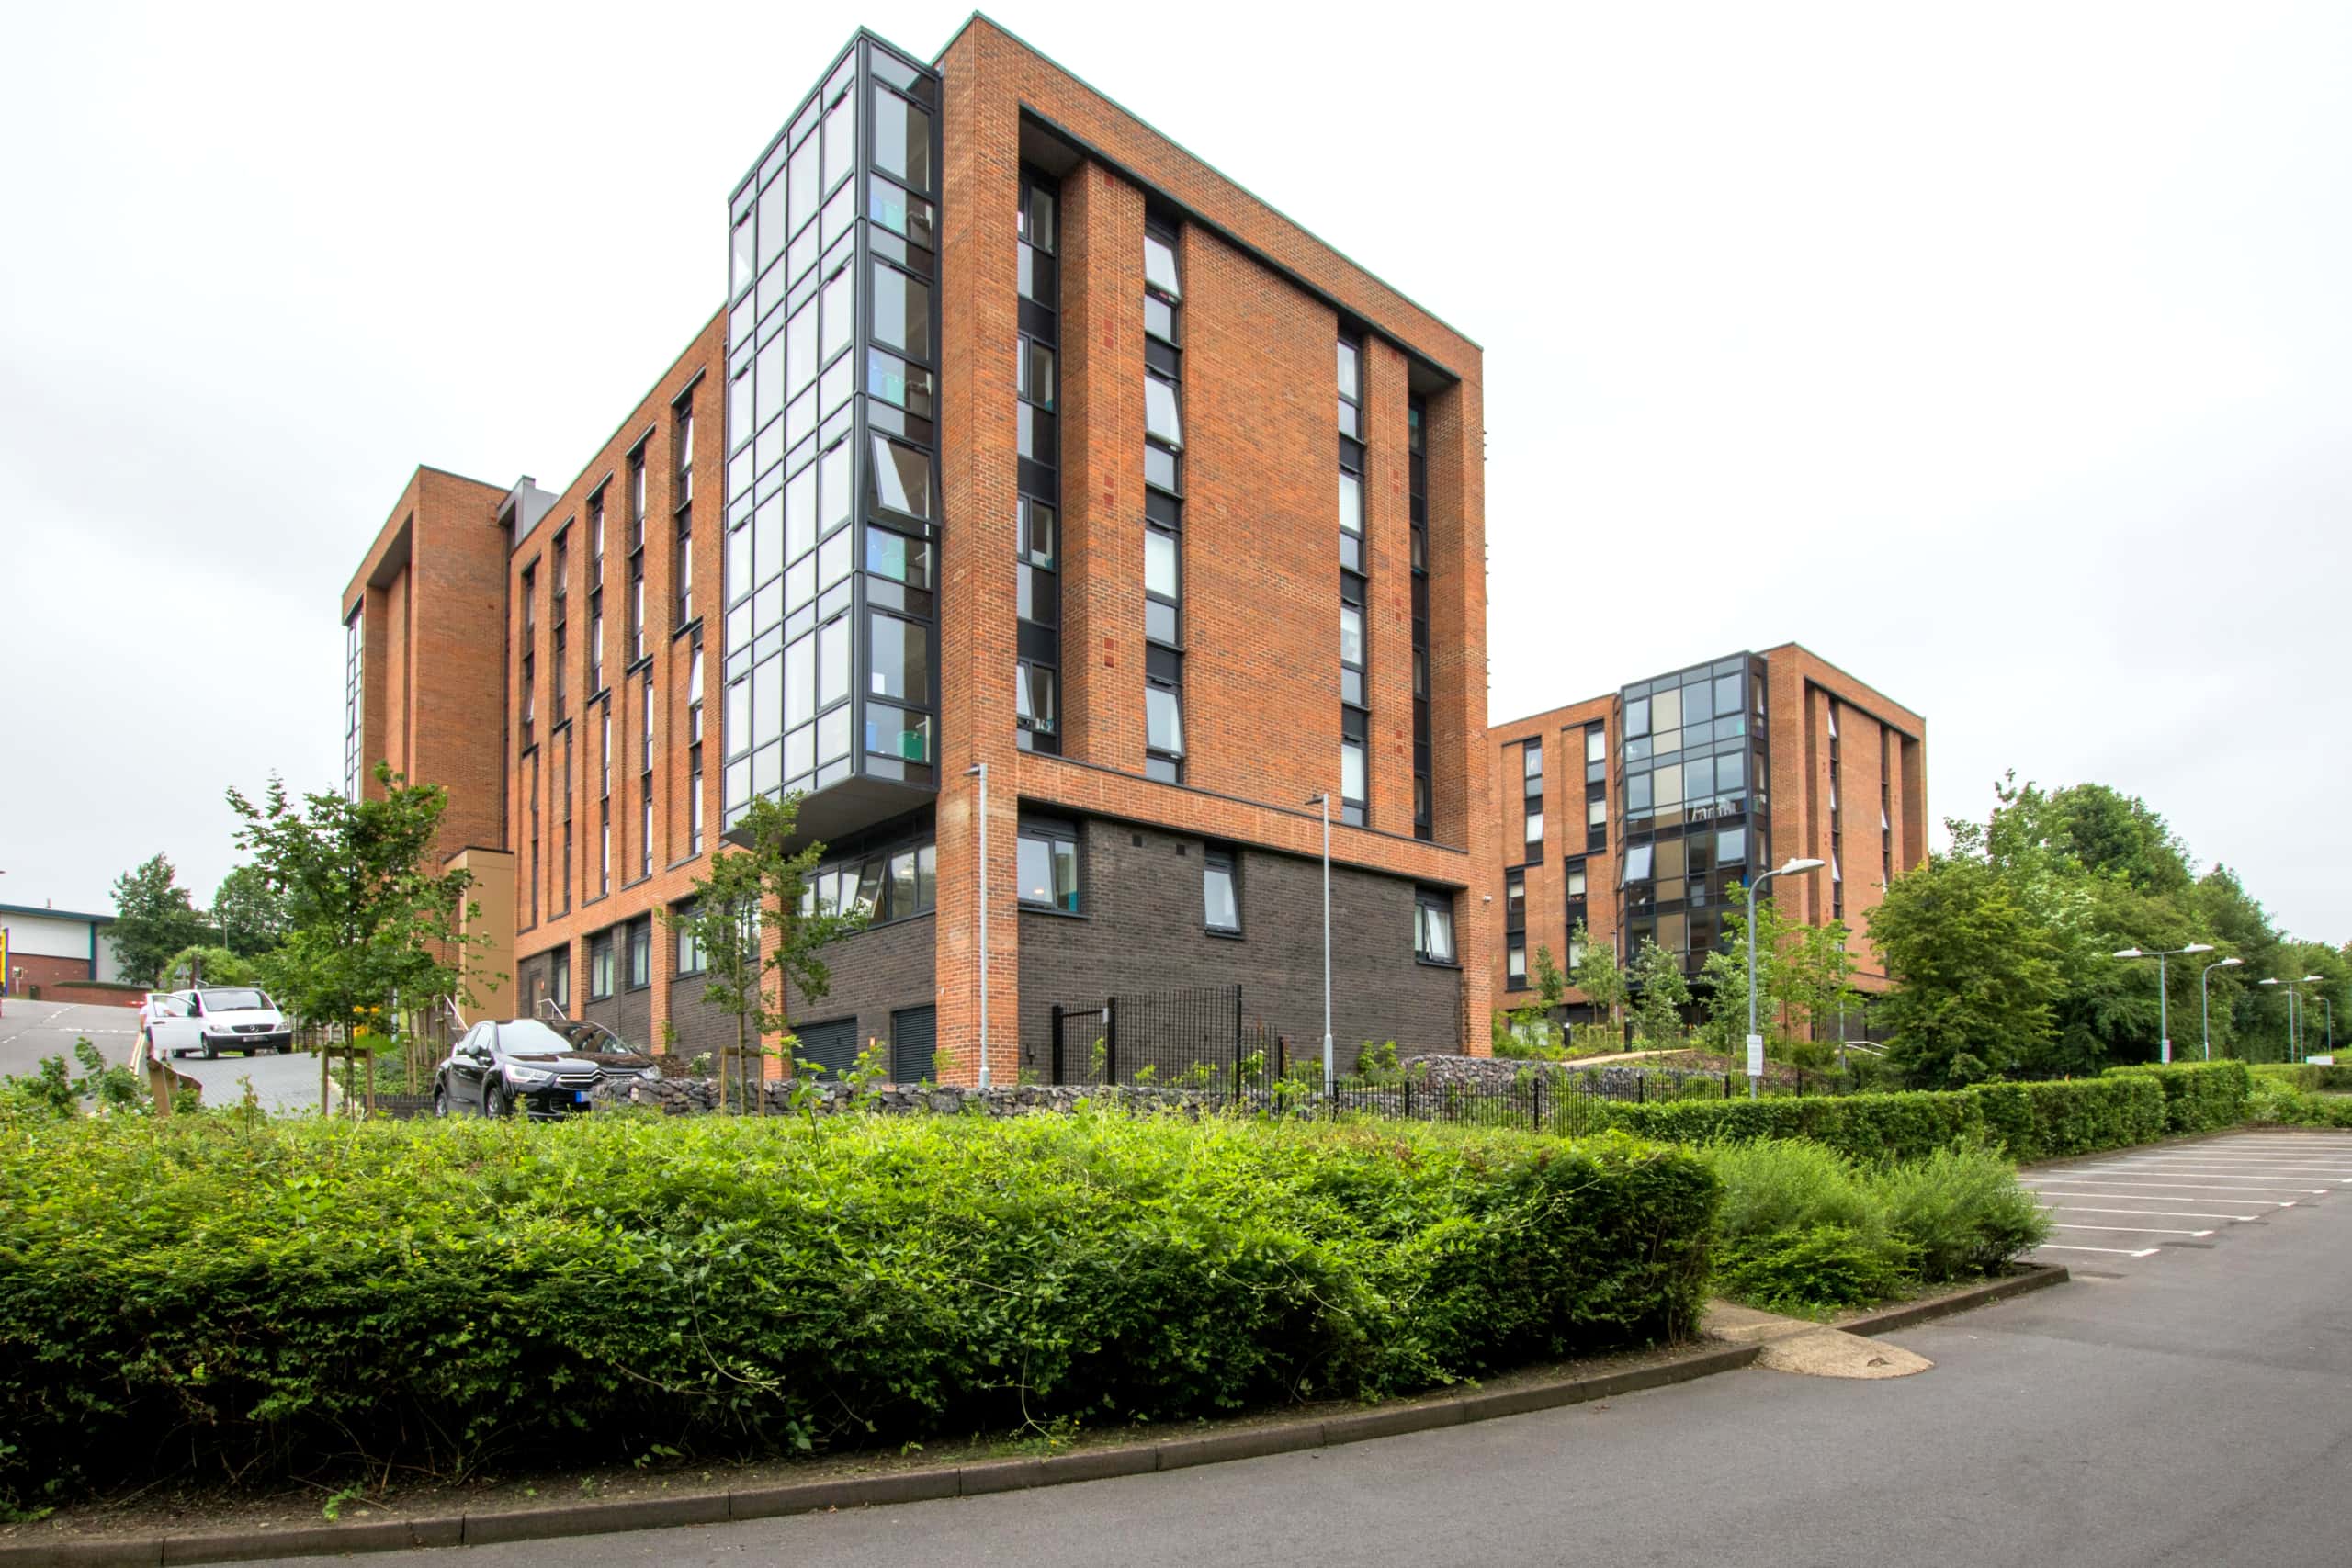 Student Accommodation, Winchester